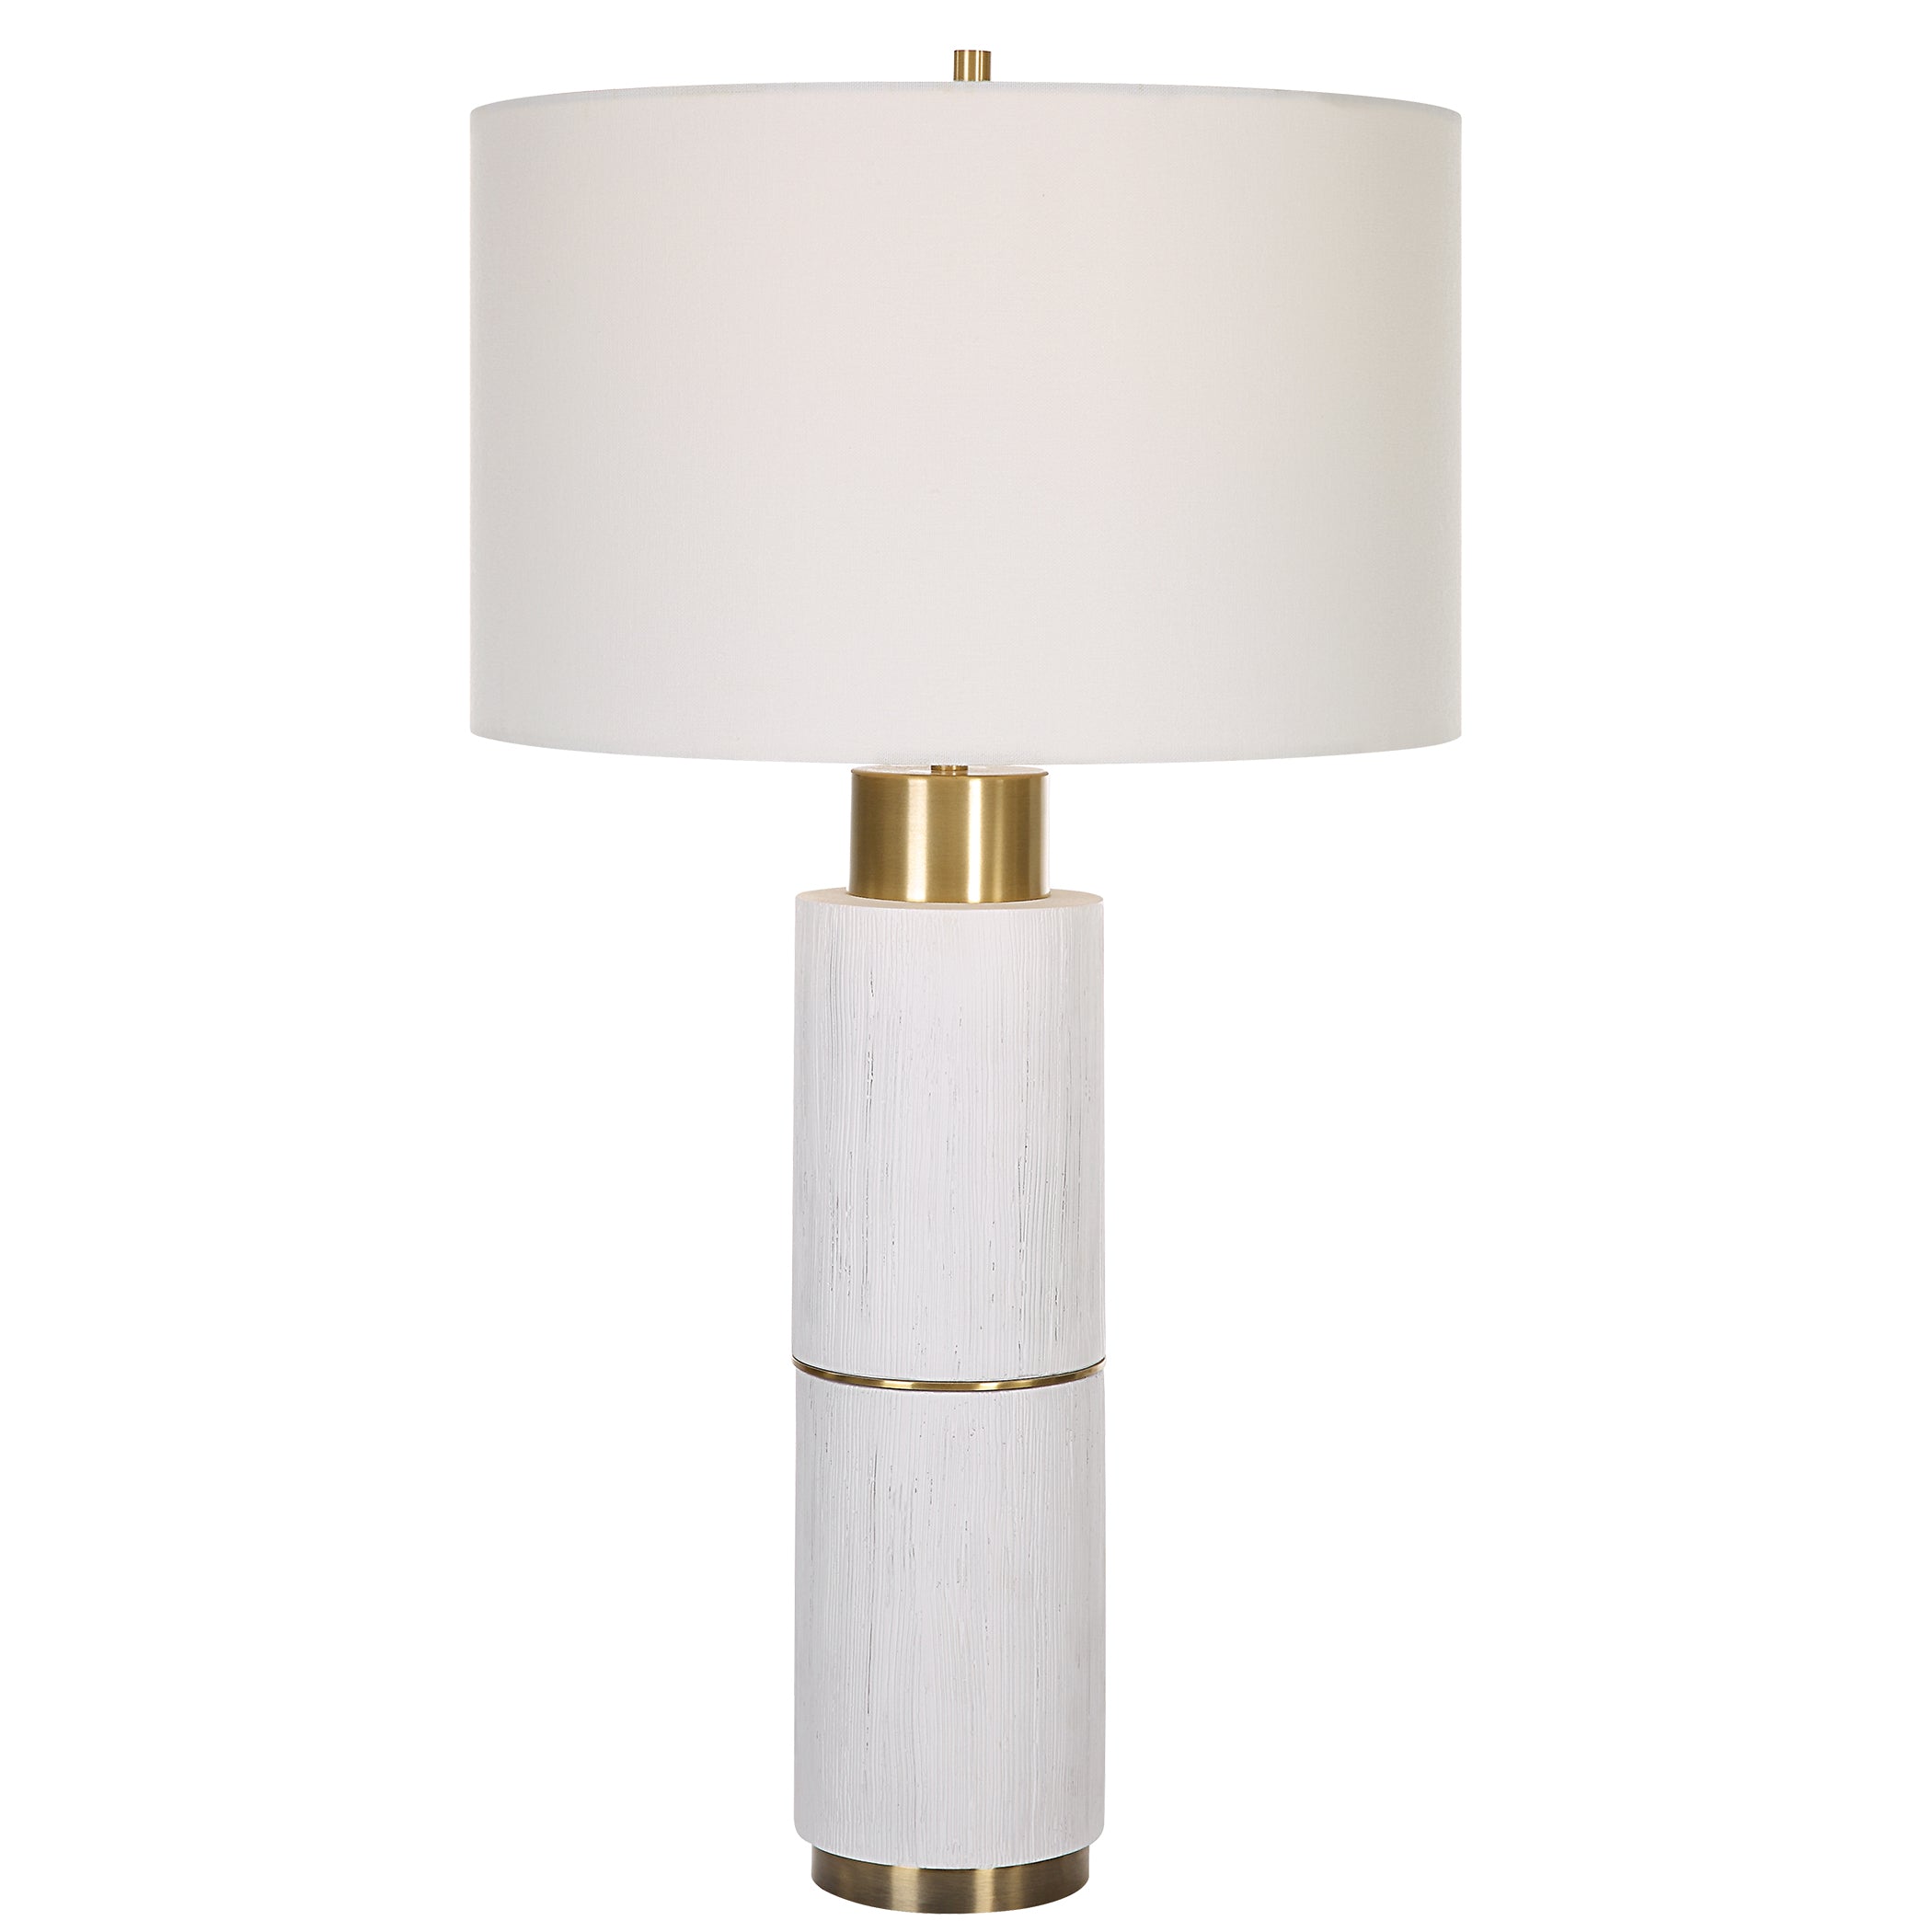 Ruse Whitewashed Table Lamp Uttermost